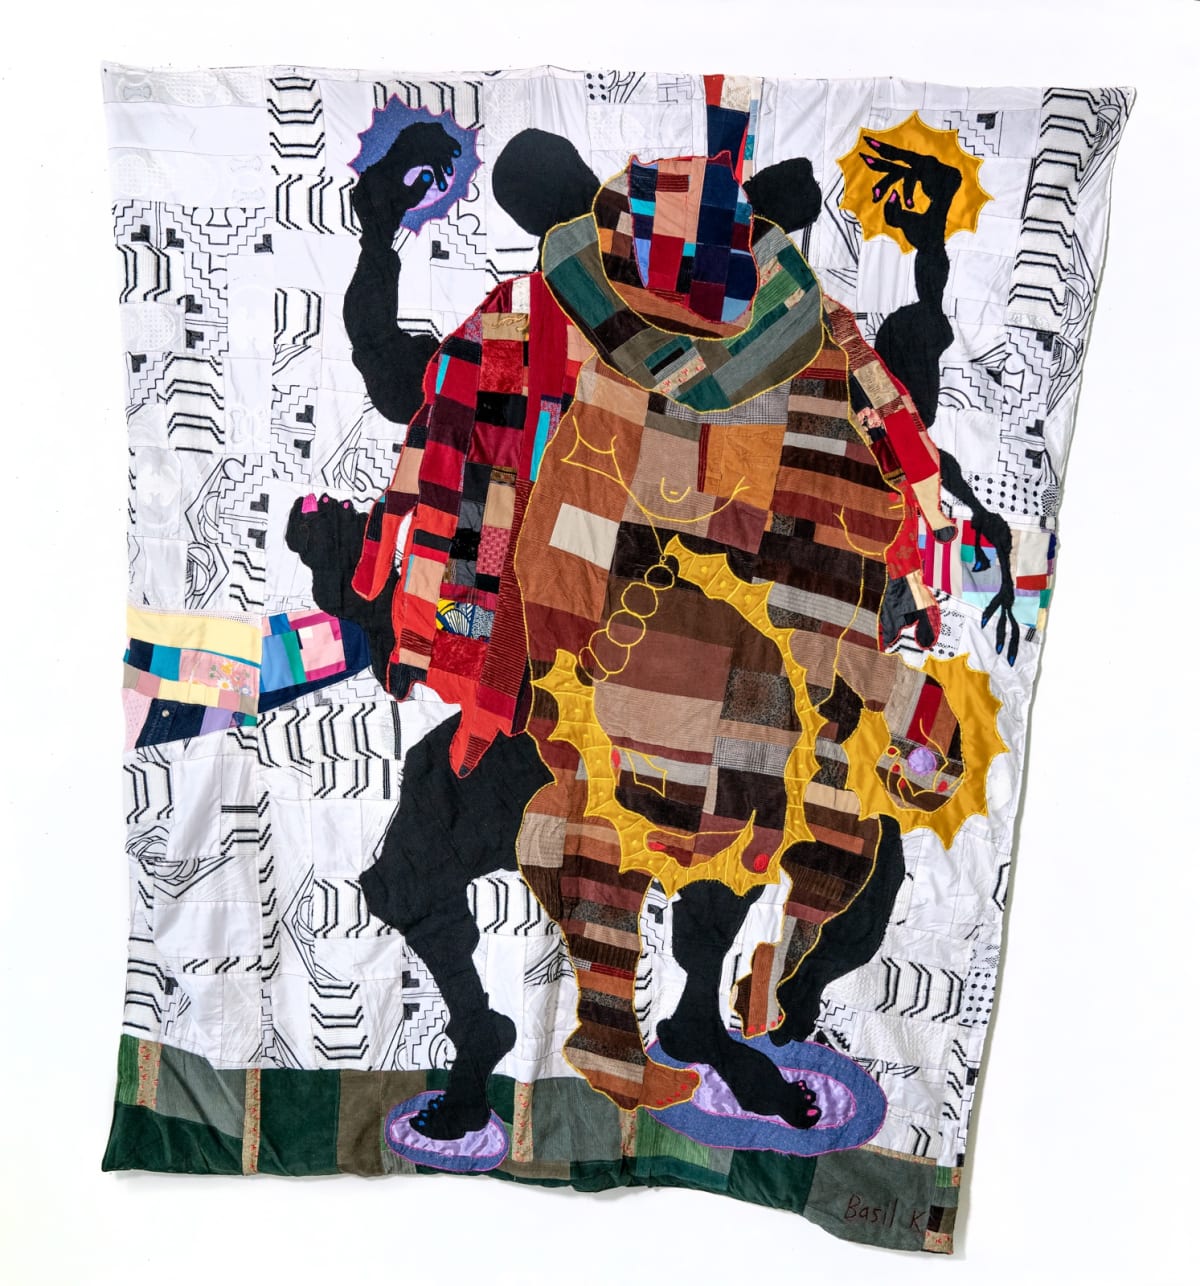 FEATURED IMAGE: BASIL KINCAID, ORDER MY STEPS, 2020, QUILT VINTAGE CORDUROY, DONATED CLOTHES, CLOTHES FROM THE ARTIST, GHANAIAN EMBROIDERED FABRICS, HAND-WOVEN GHANAIAN KENTE, WAX BLOCK PRINT COTTON FABRIC, AND WOOL, 96 X 85 X 1 IN. (IMAGE COURTESY THE ARTIST AND KAVI GUPTA.)